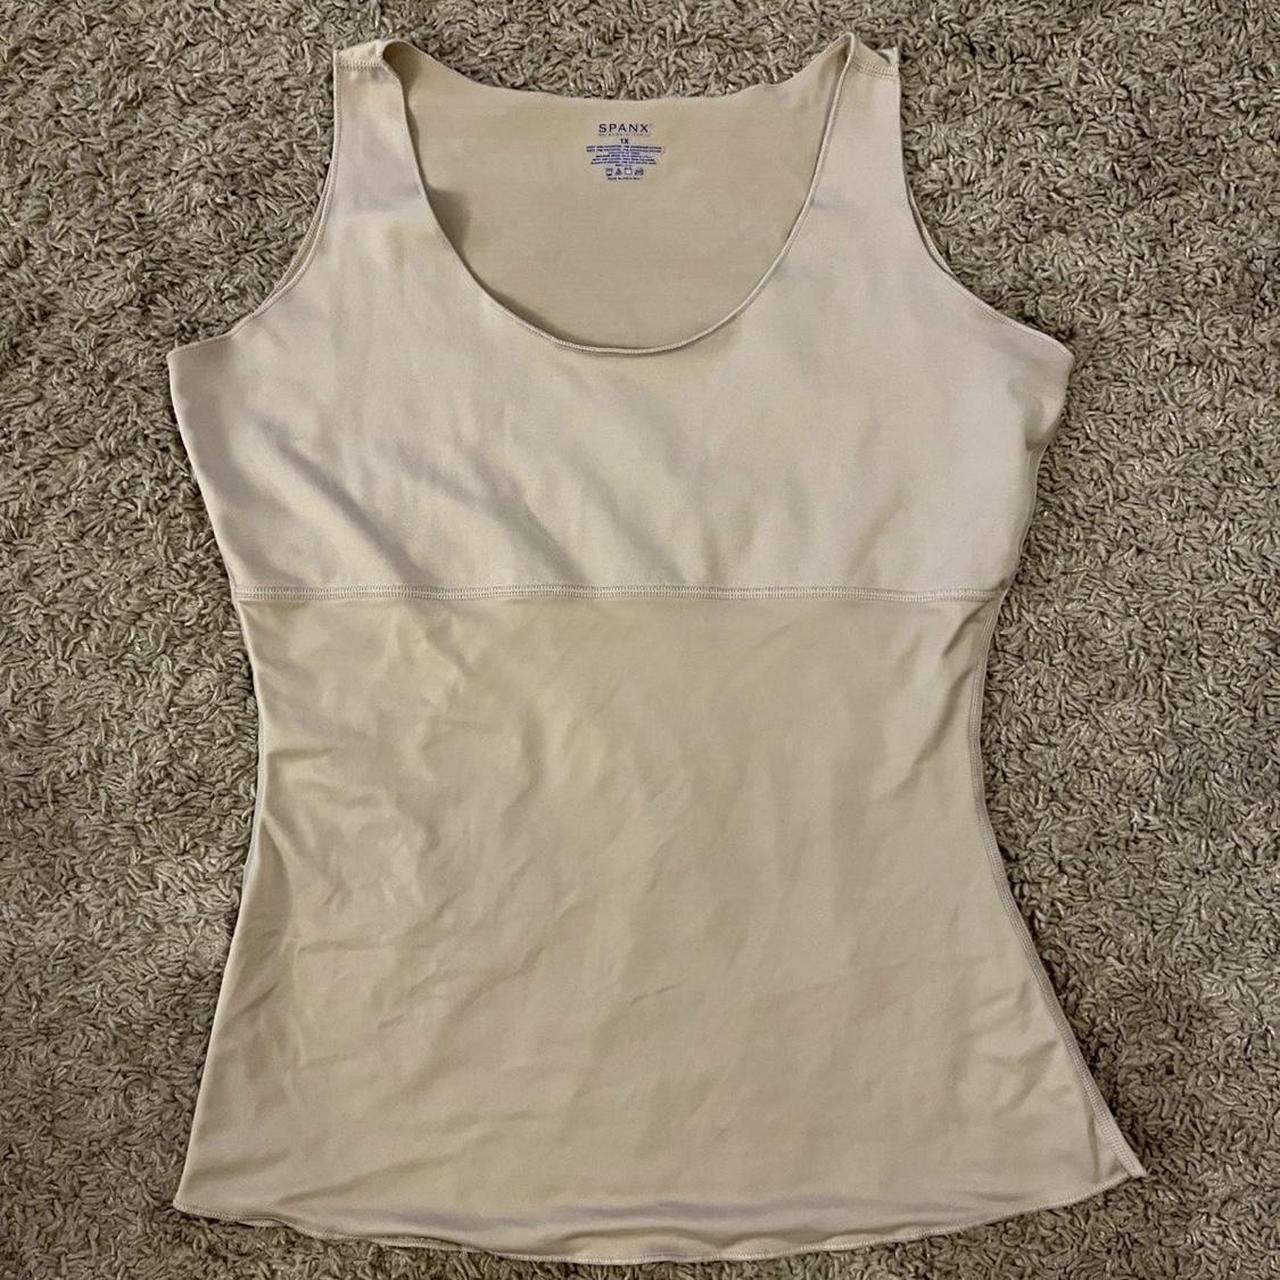 Spanx shapewear tank size 1X in good condition from